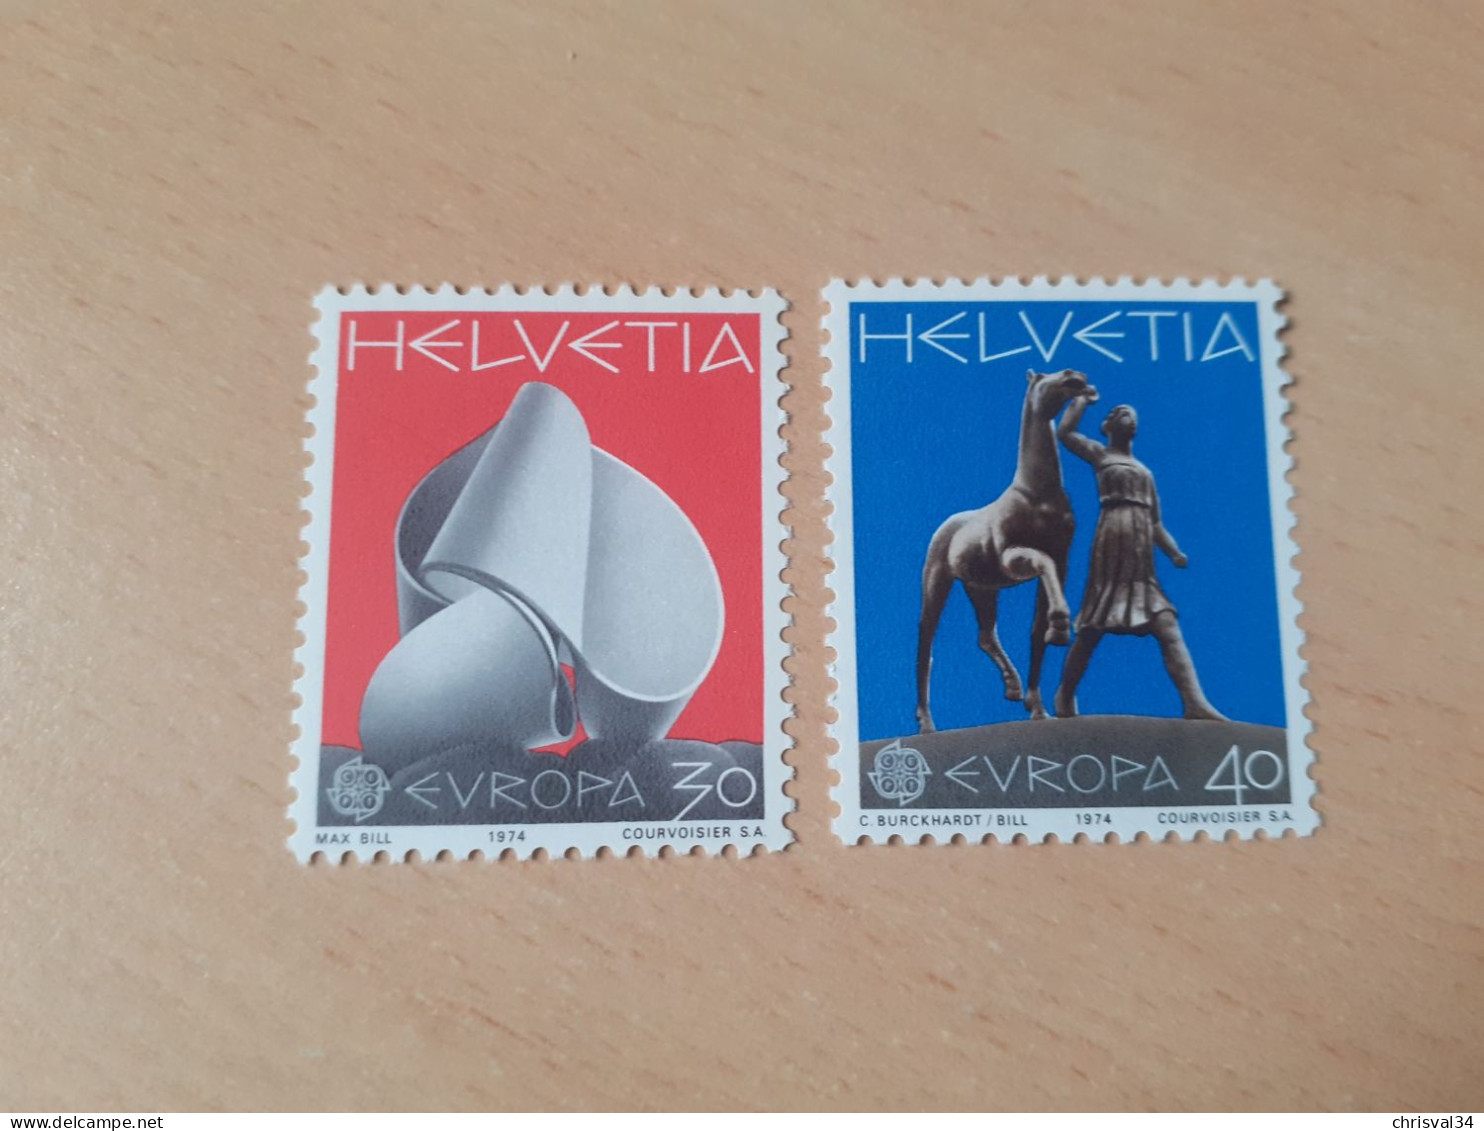 TIMBRES   SUISSE   ANNEE   1974   N  954  /  955   COTE  1,70  EUROS   NEUFS  LUXE** - Nuevos